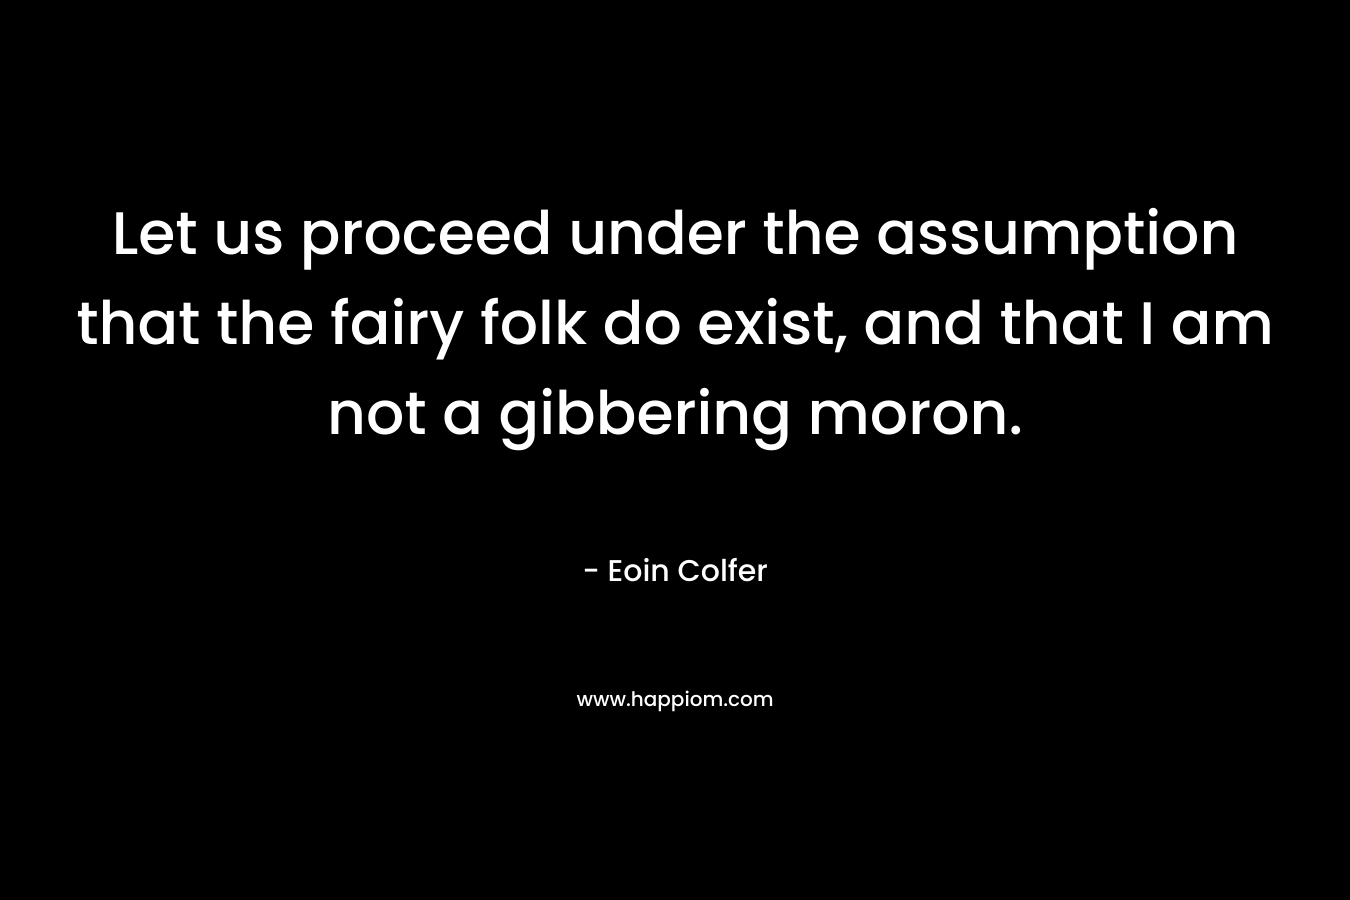 Let us proceed under the assumption that the fairy folk do exist, and that I am not a gibbering moron.